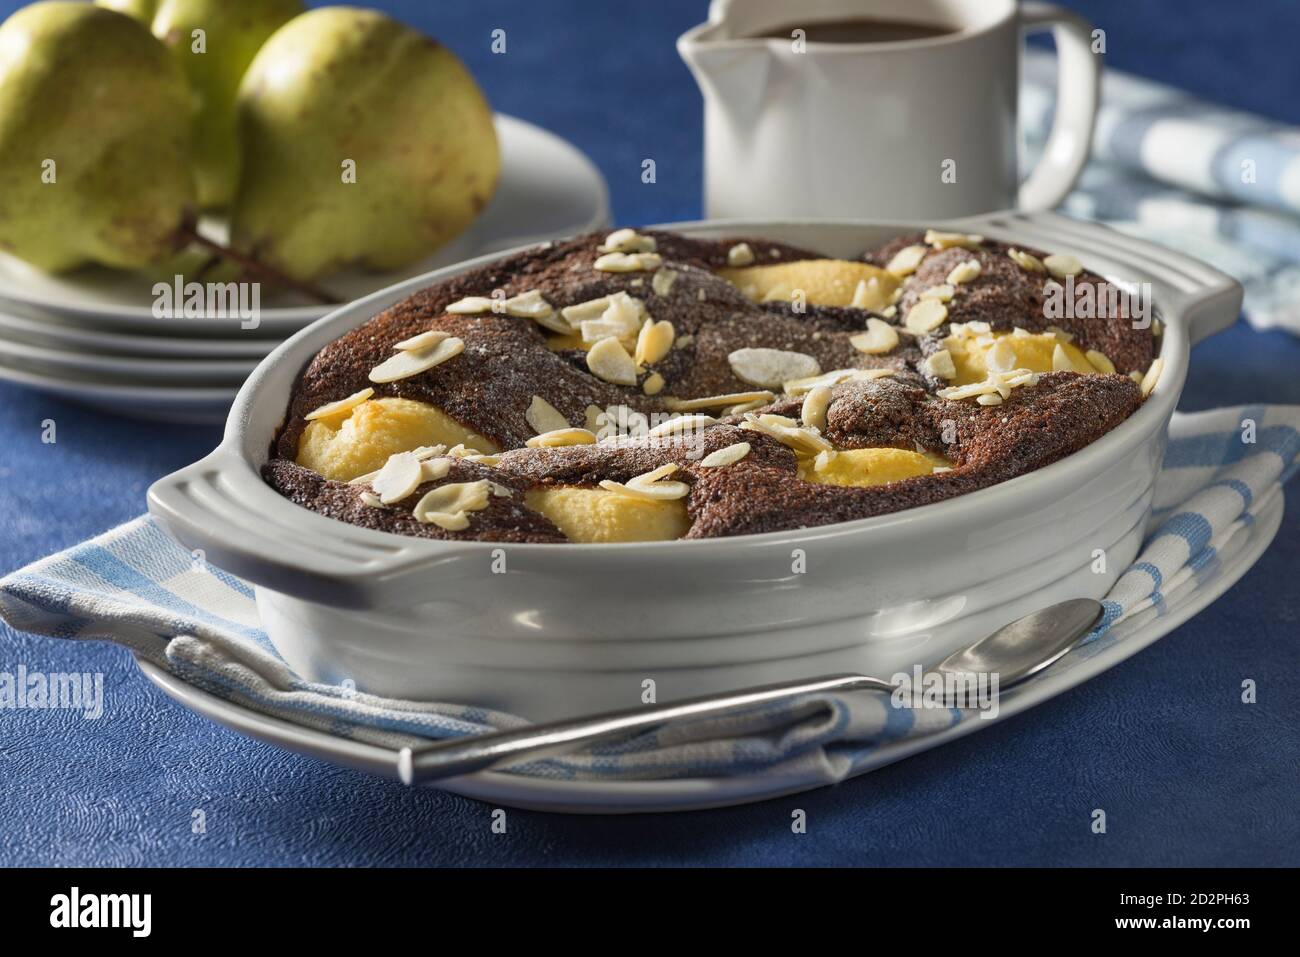 Pear and chocolate pudding. Stock Photo